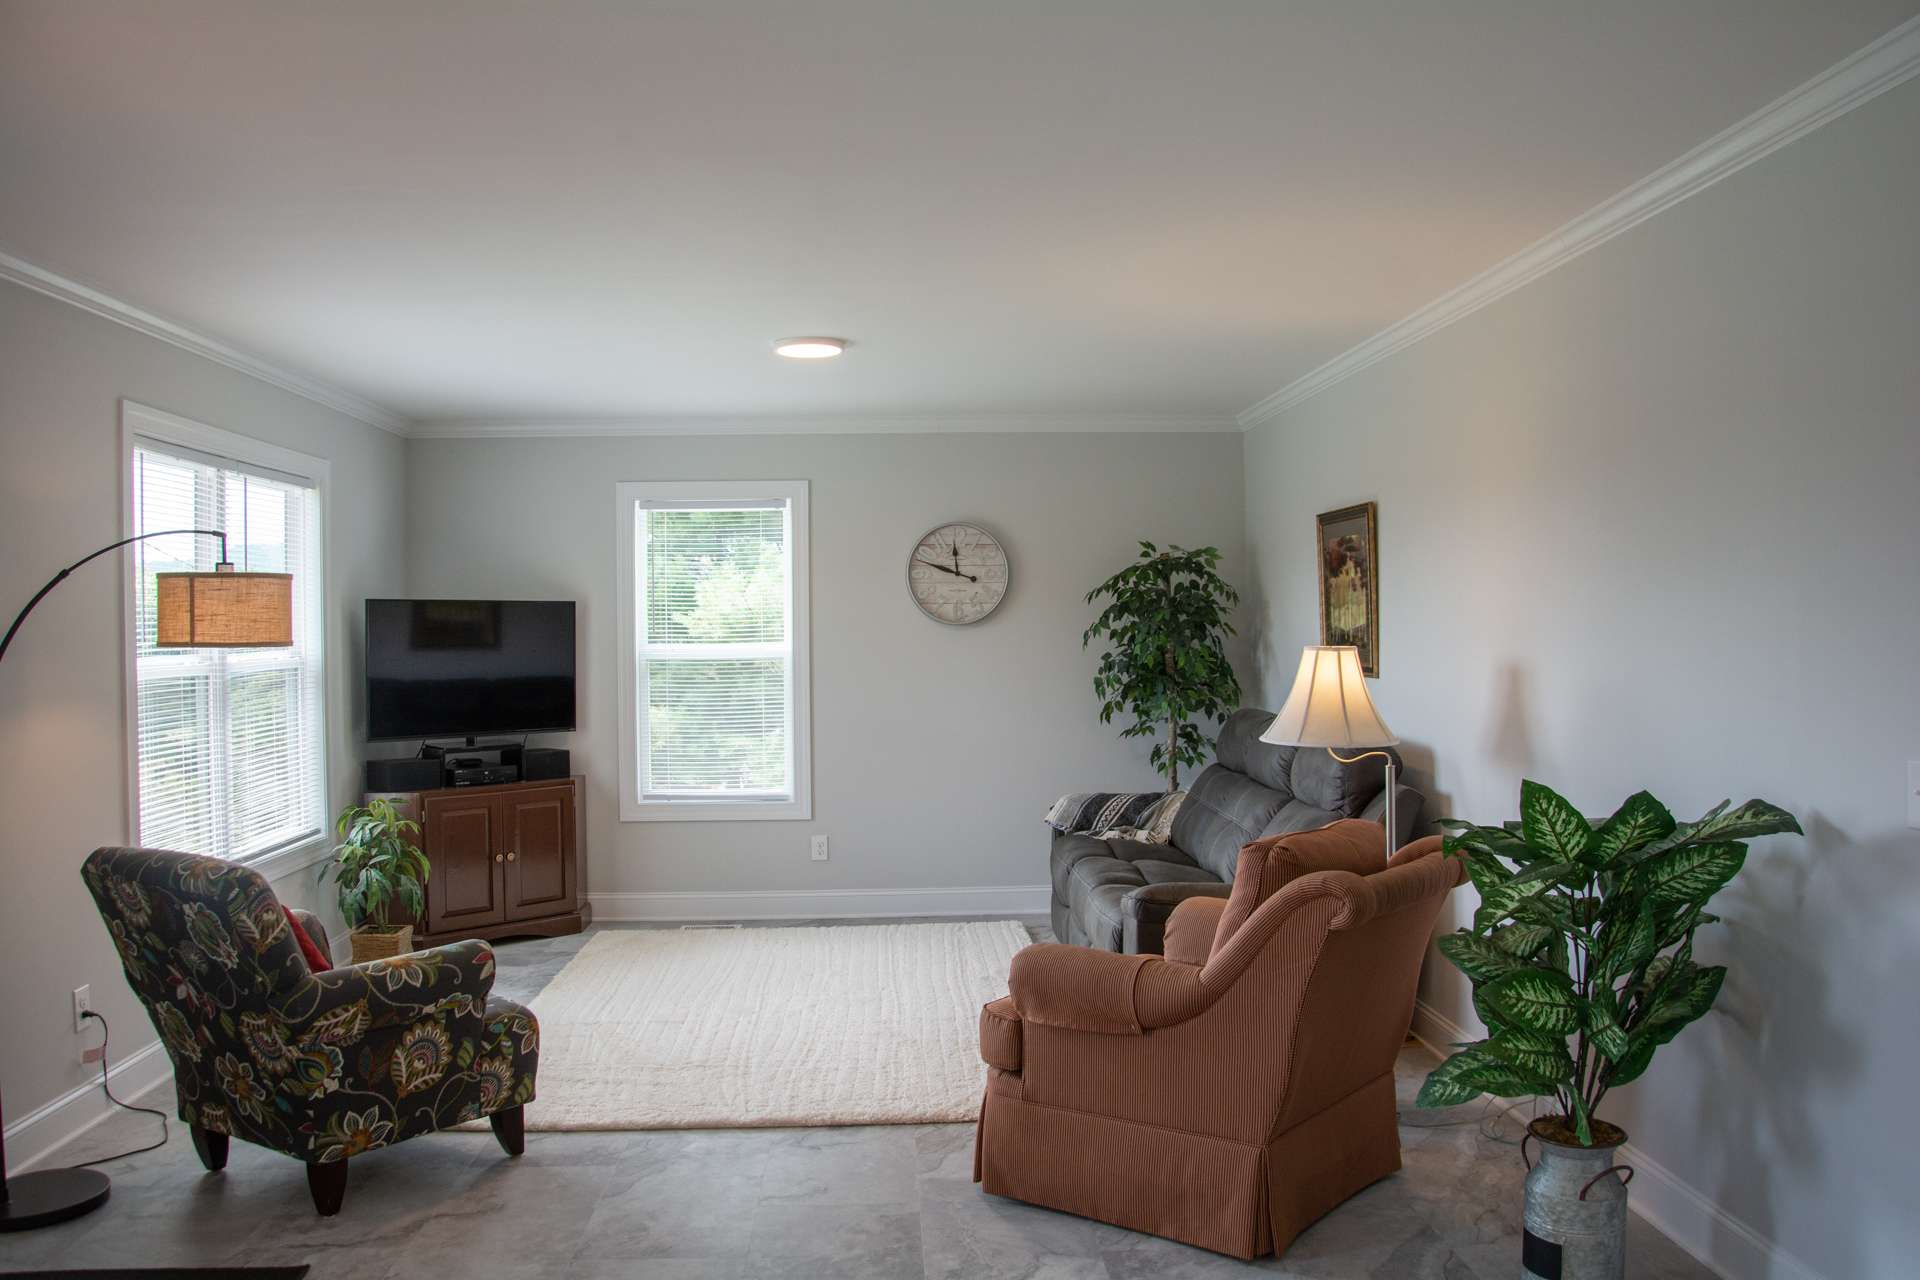 An inviting living area is bright and cheery with plenty of natural light.